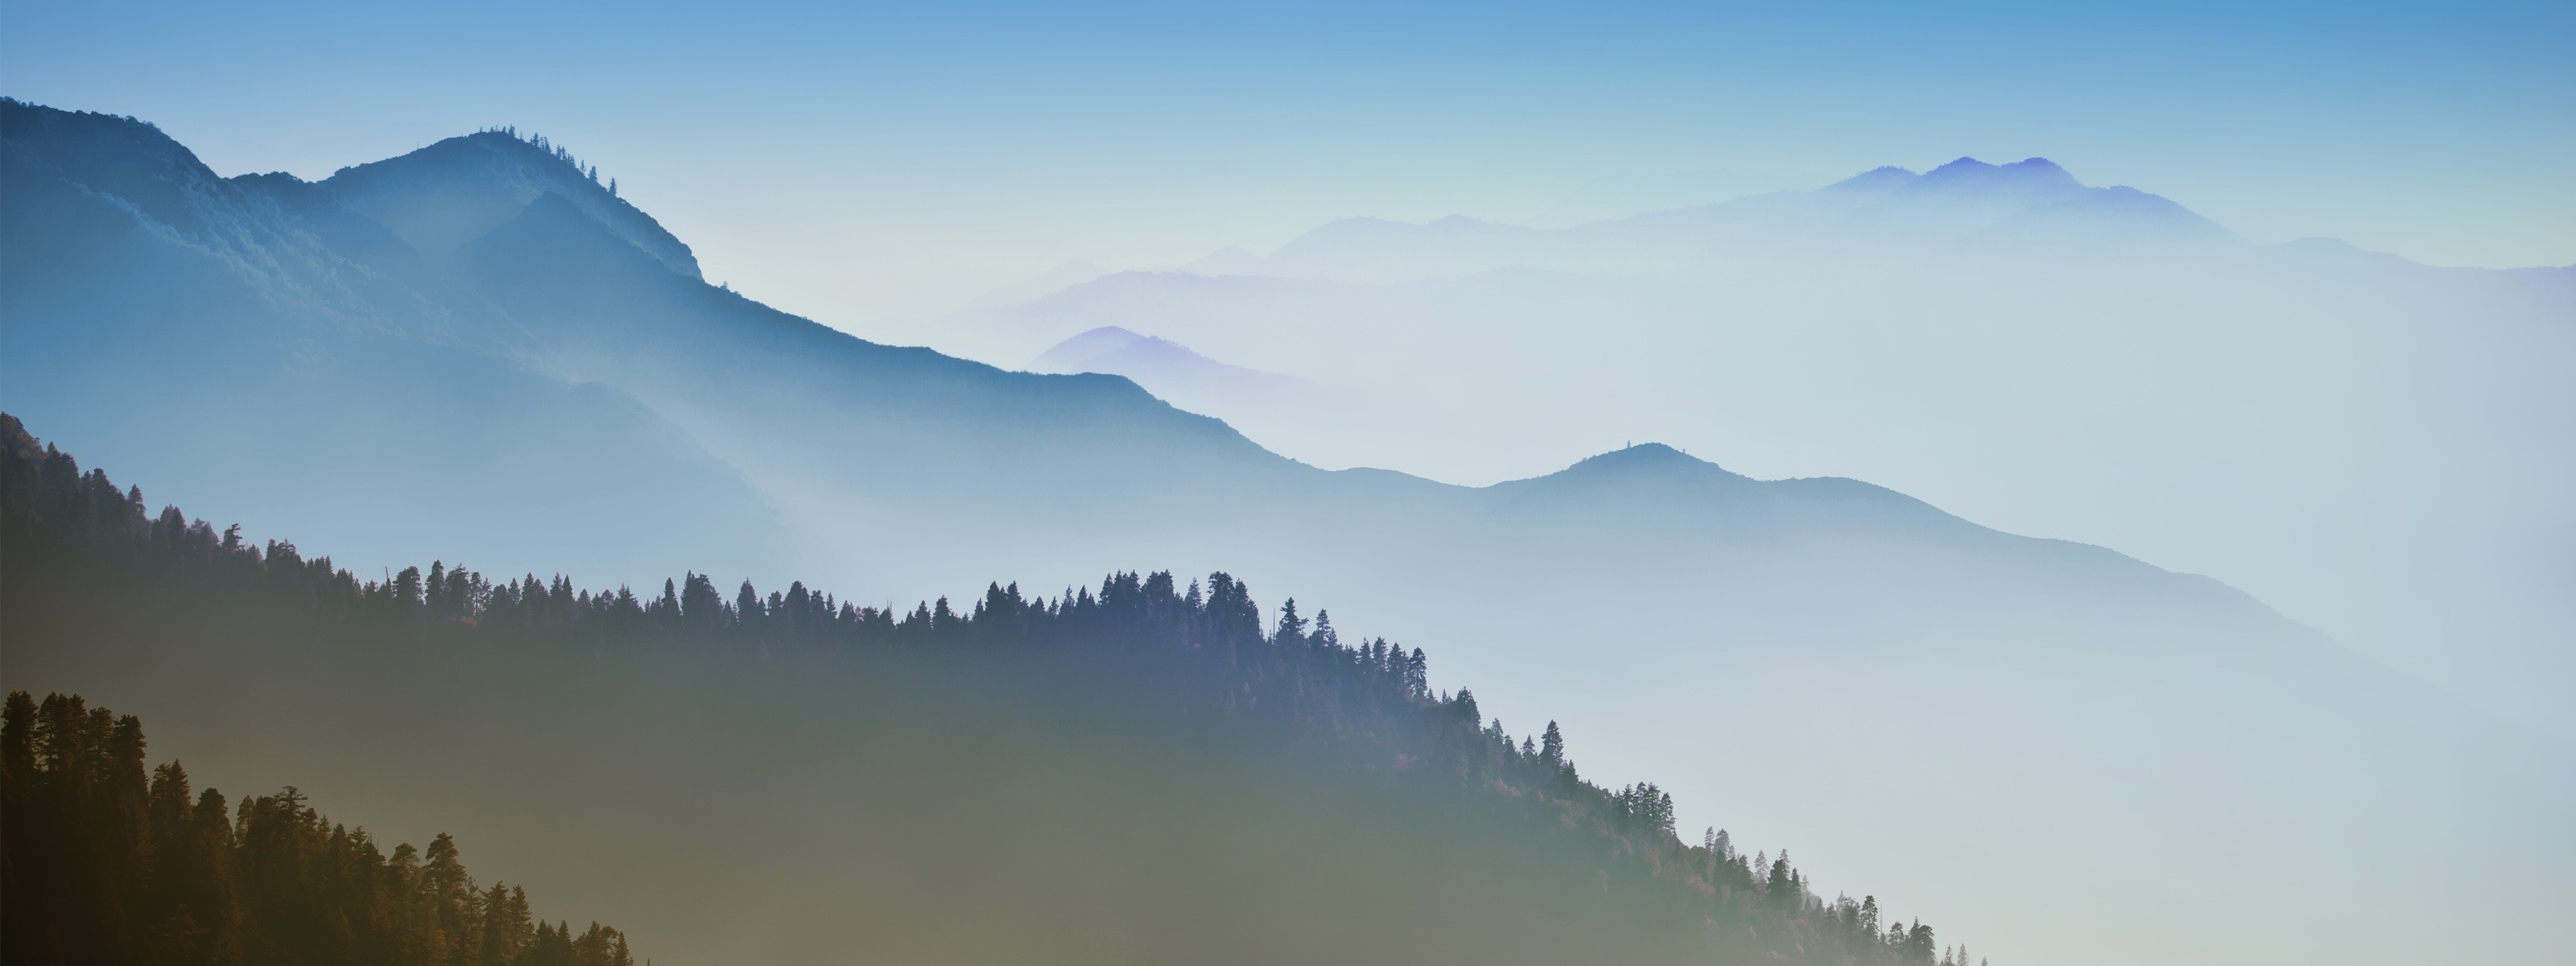 3200x1200 ... OS X Mavericks Scenery Wallpapers in jpg format for free download